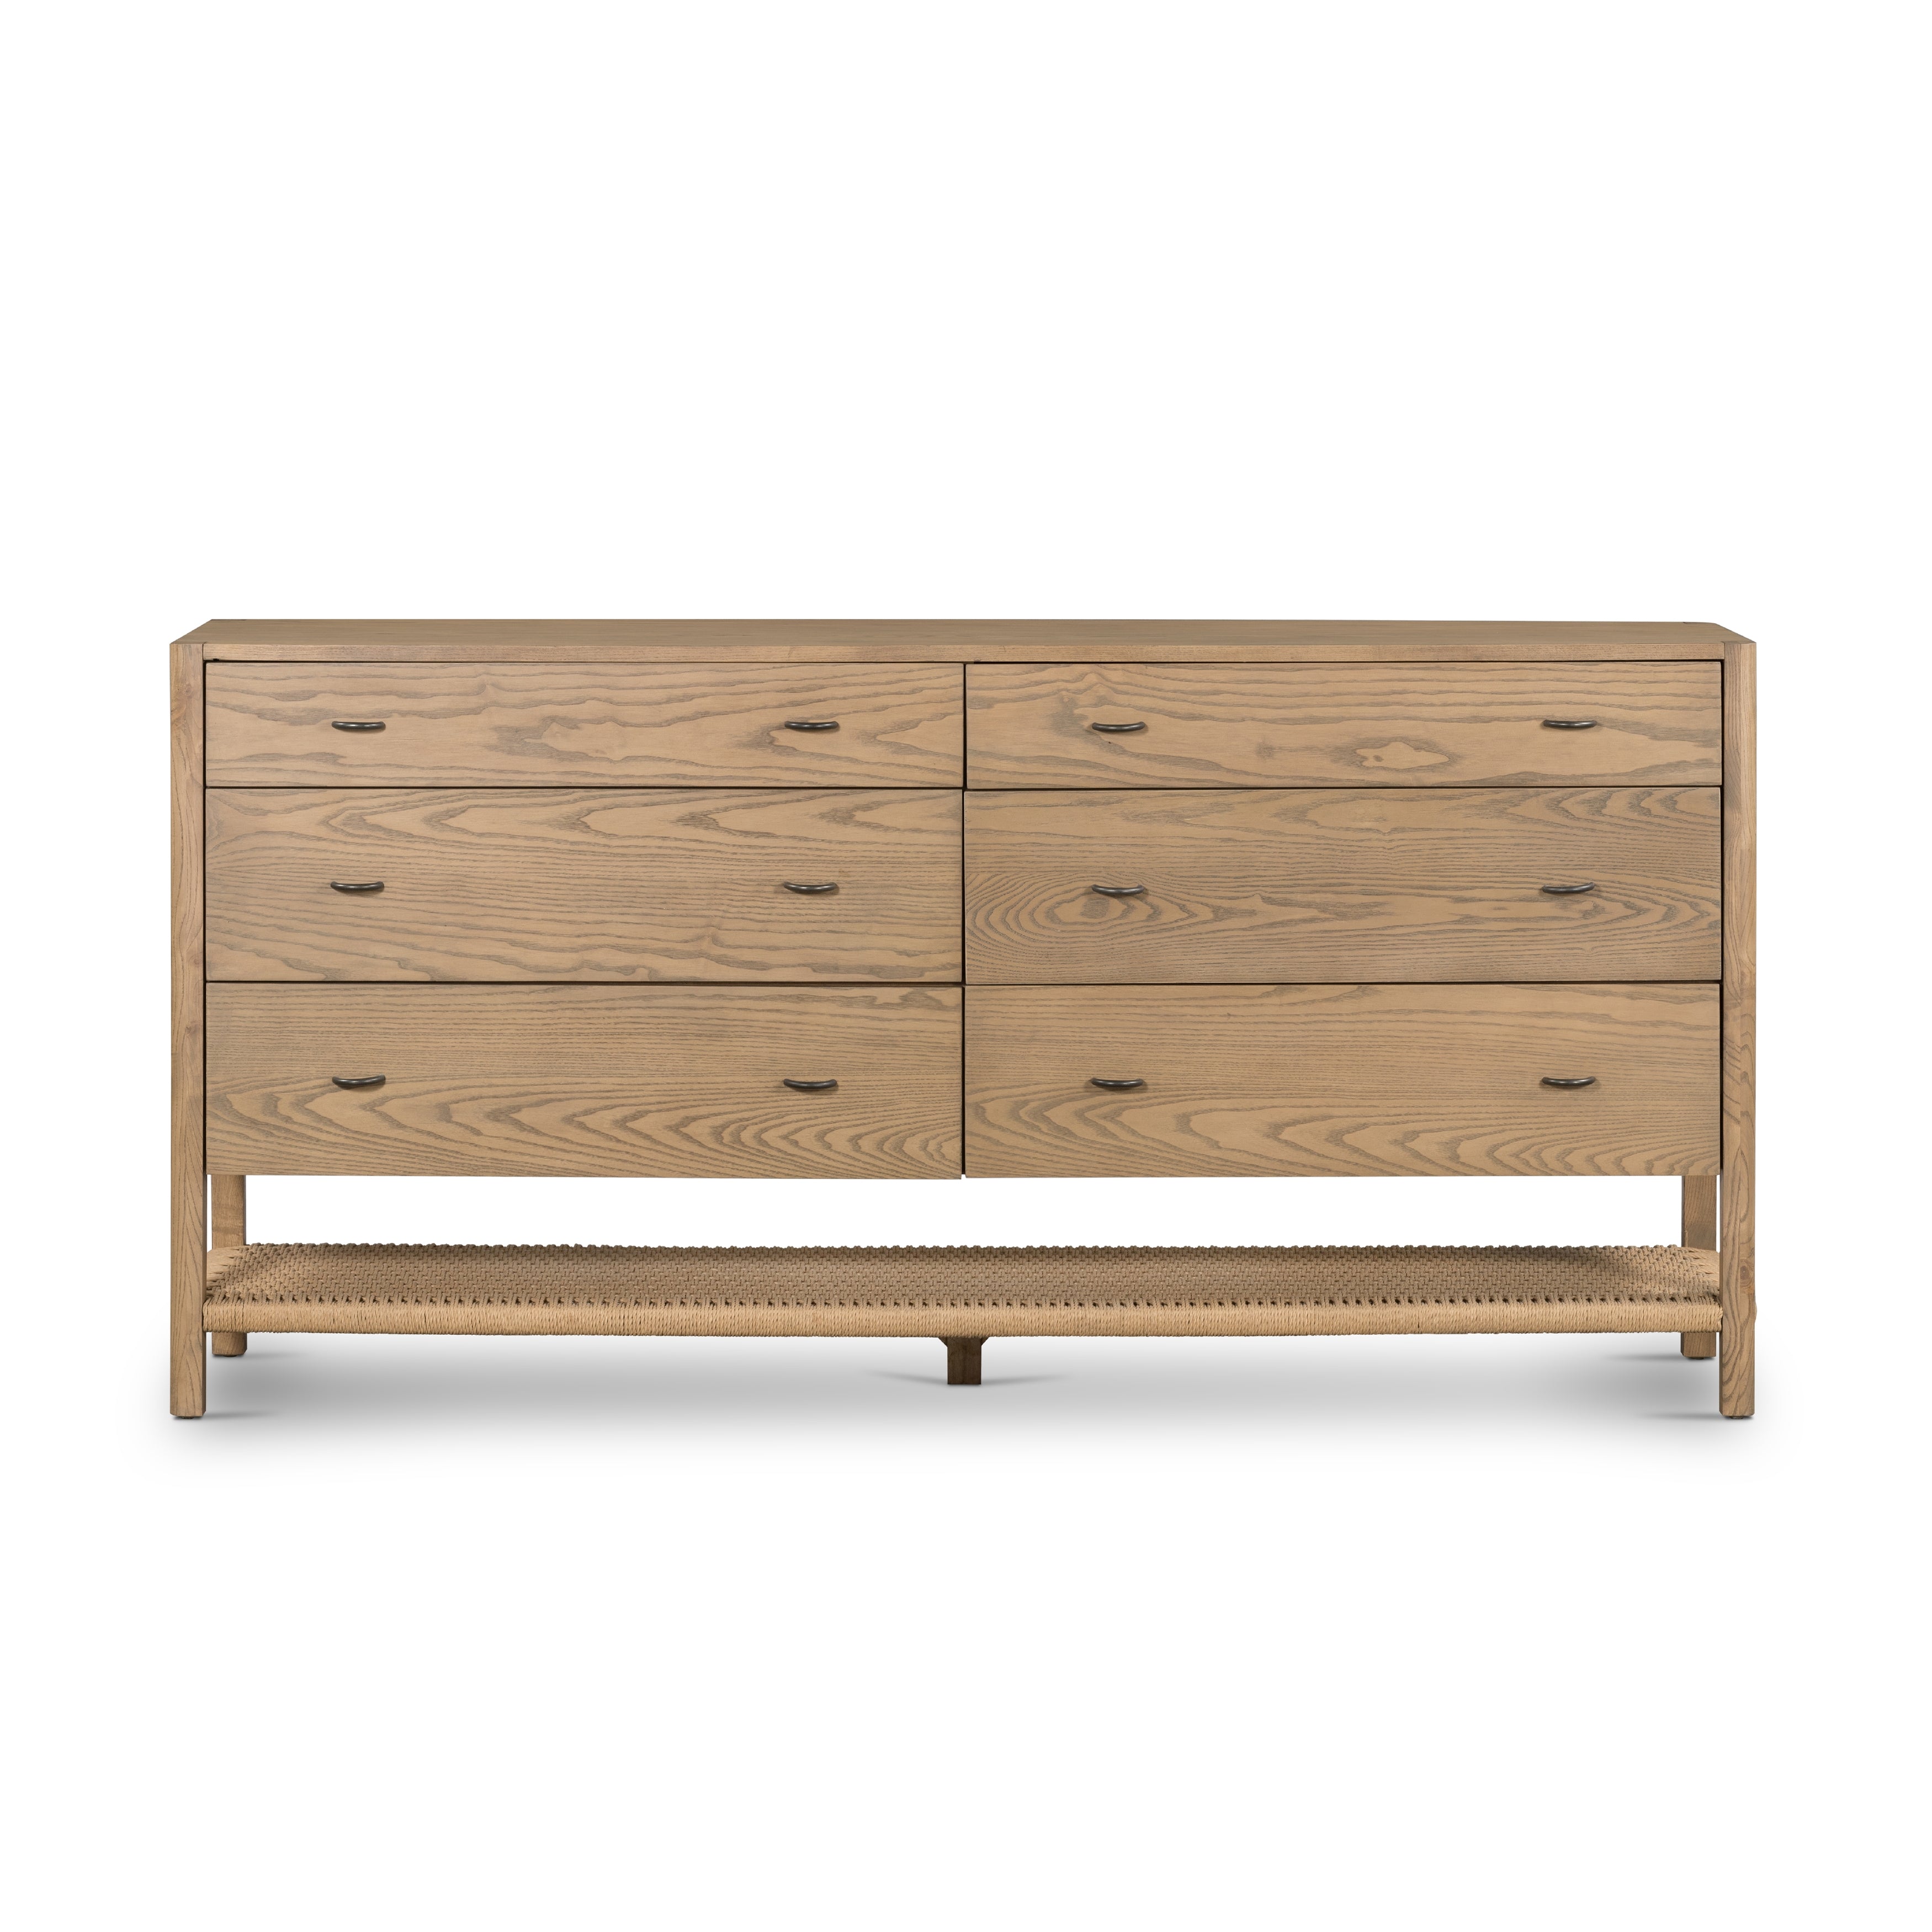 Simple yet refined, the Zuma Dune Ash 6 Drawer Dresser is a danish design-influenced dresser that is made from solid ash, with iron hardware finished in sleek gunmetal. Amethyst Home provides interior design services, furniture, rugs, and lighting in the Dallas metro area.